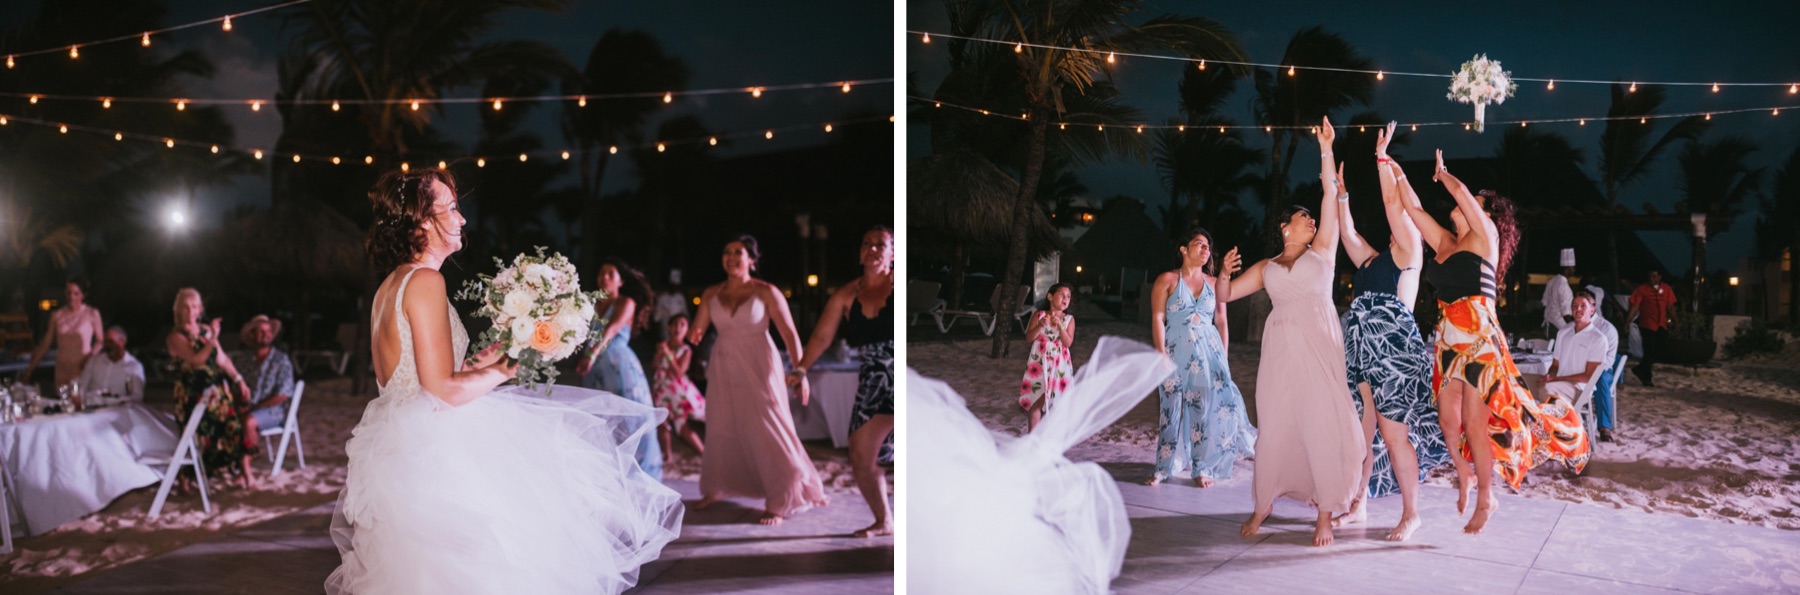 Side by side photos of the bouquet toss at Hard rock punta cana wedding